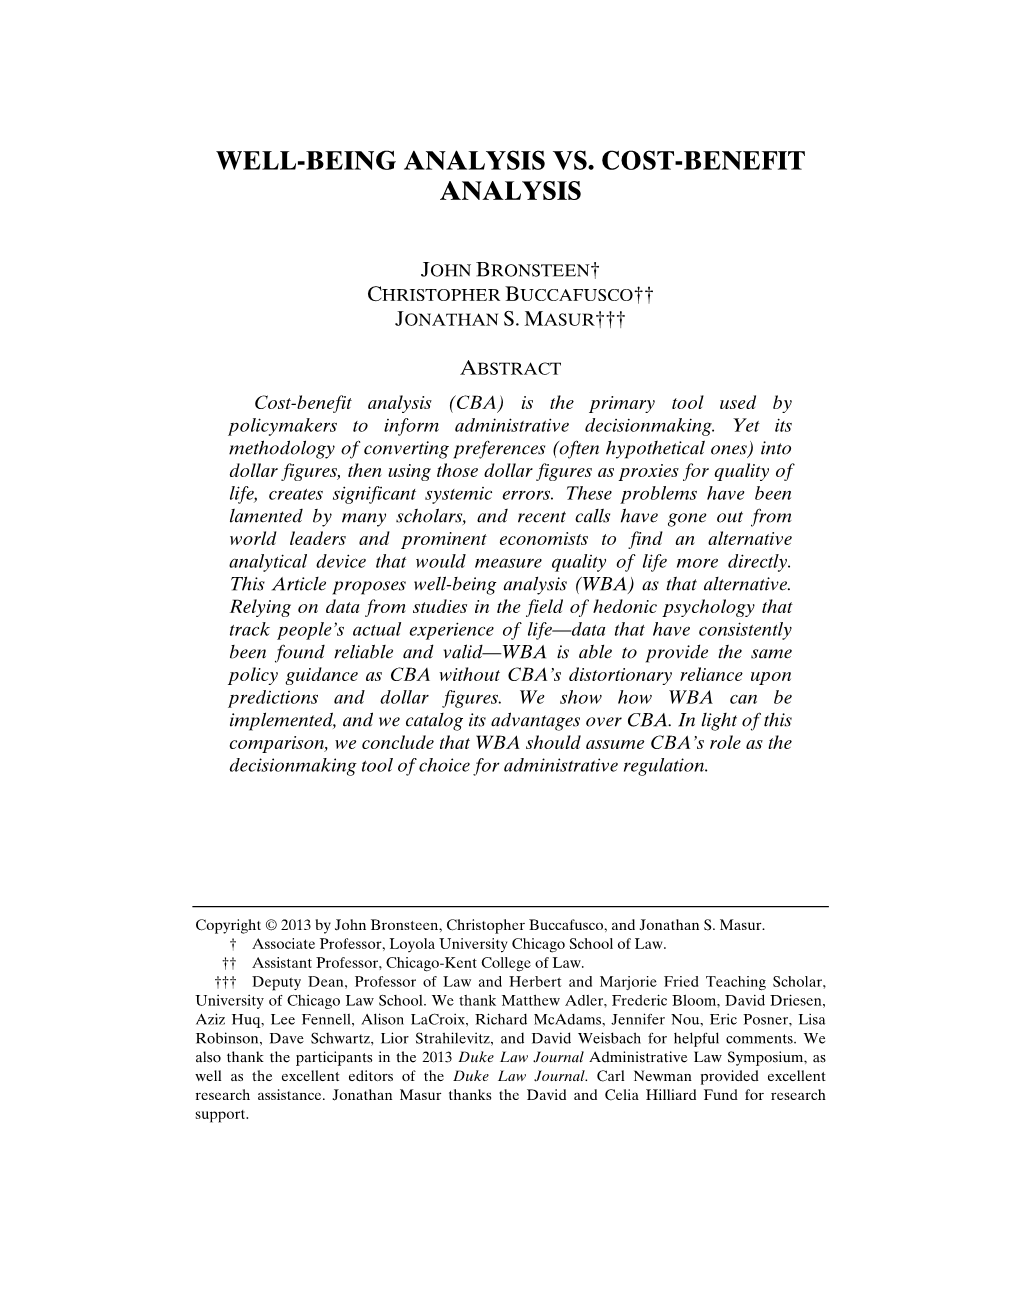 Well-Being Analysis Vs. Cost-Benefit Analysis